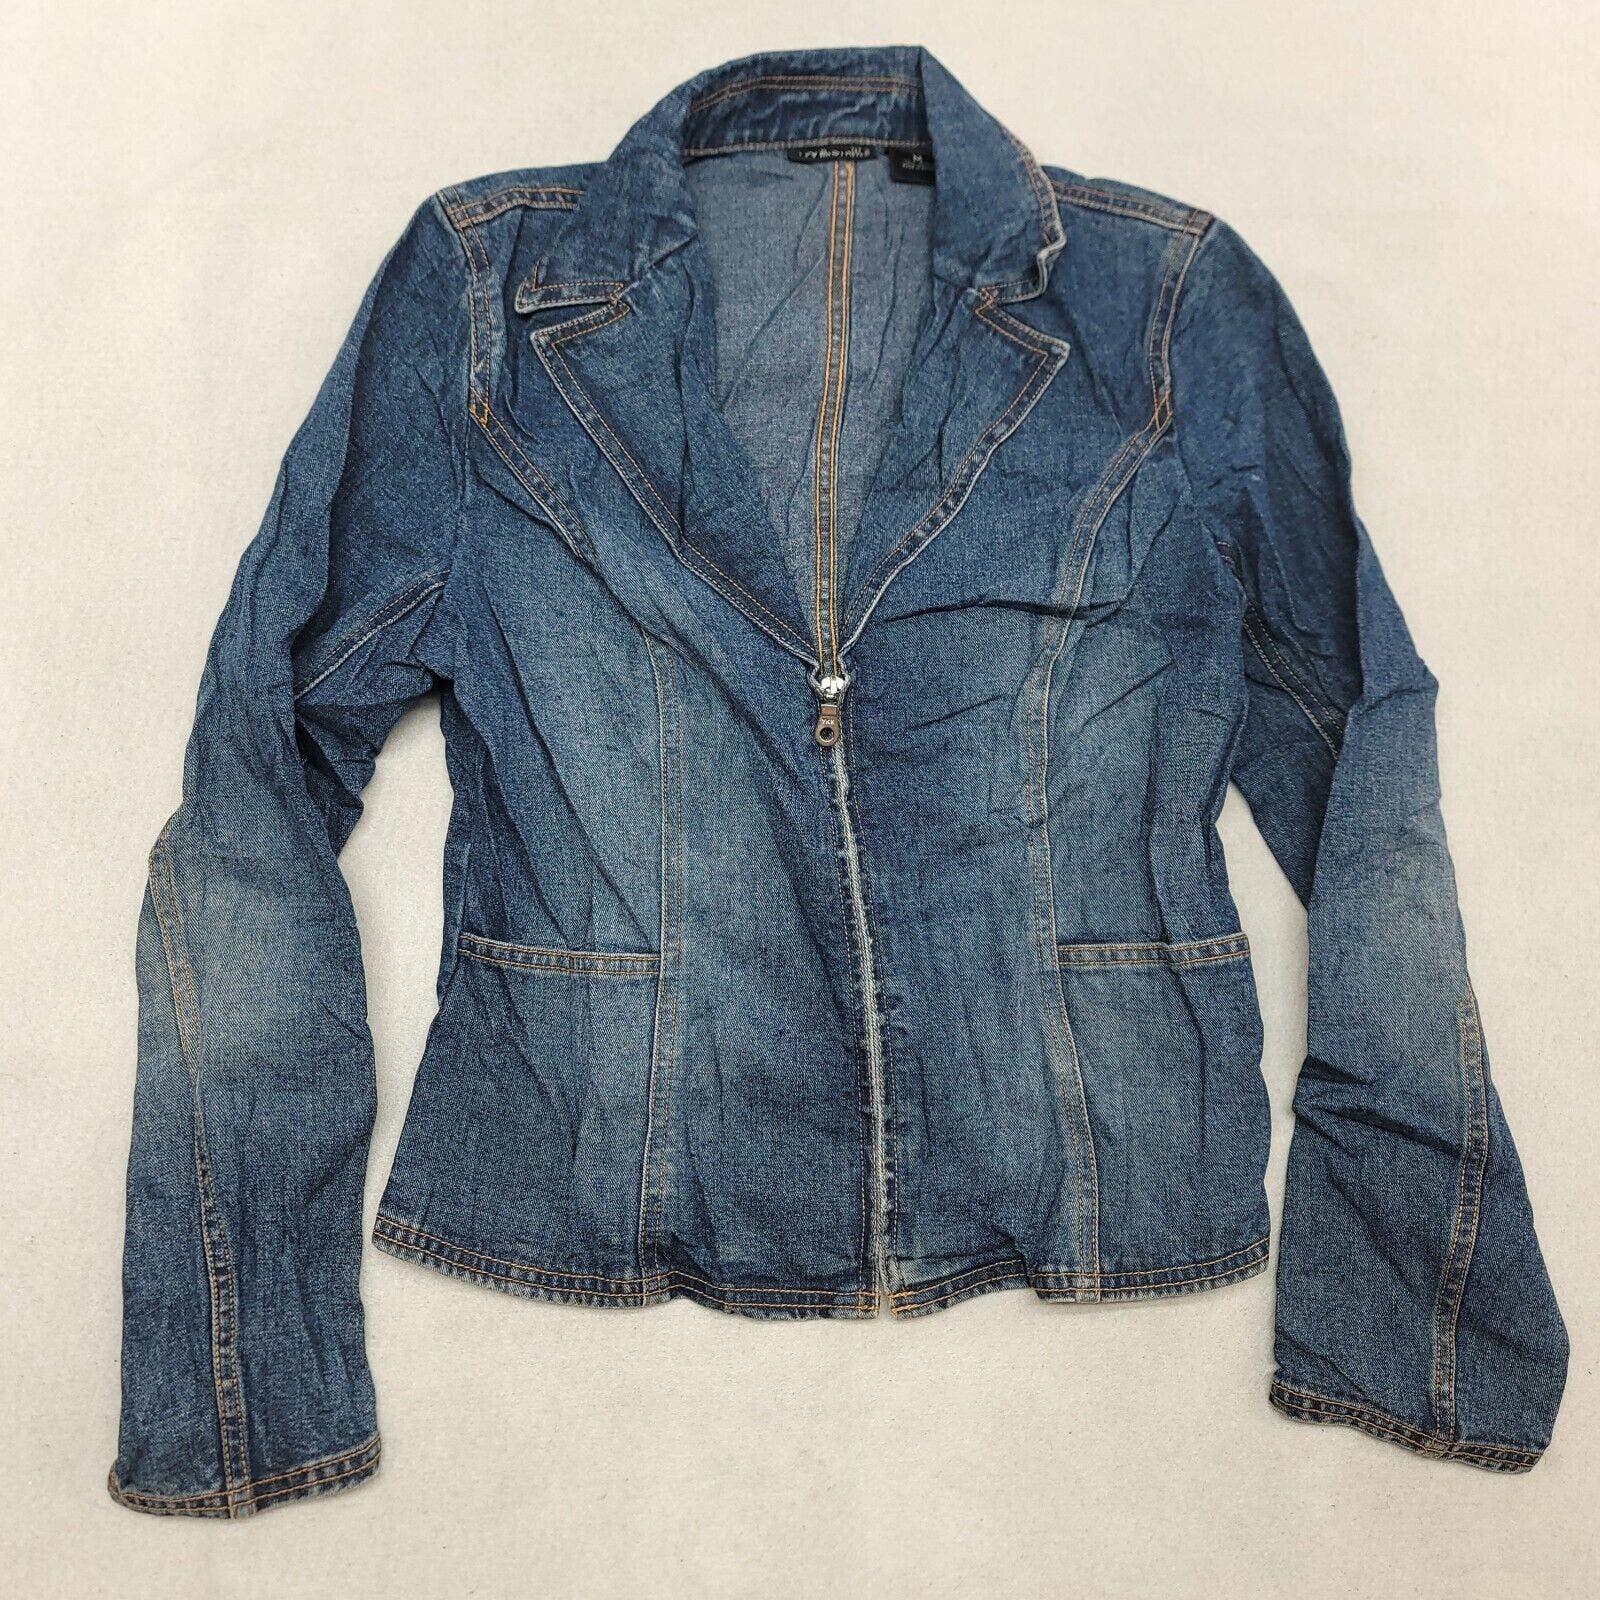 Willi Smith Willi Smith Button Up Denim Jean Jacket Womens Size M Blue Size M / US 6-8 / IT 42-44 - 2 Preview